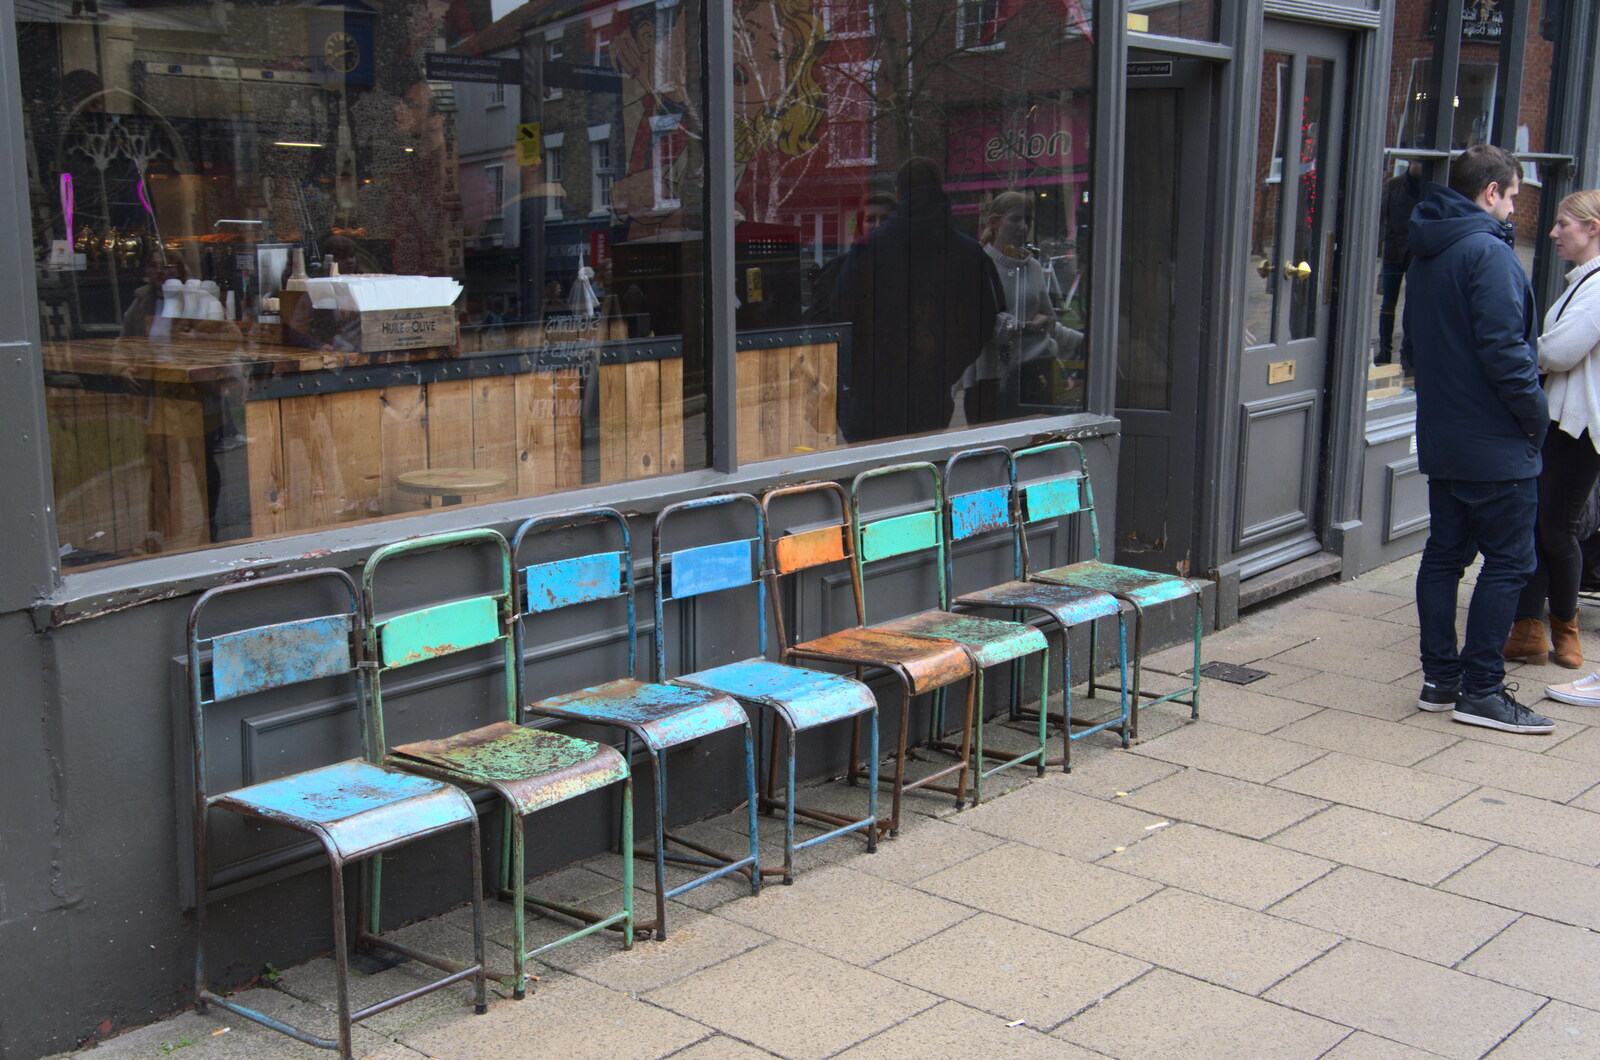 The Grosvenor Fish Bar's vintage chairs from A Trip to Cooke's Music, St. Benedict's Street, Norwich - 14th March 2020